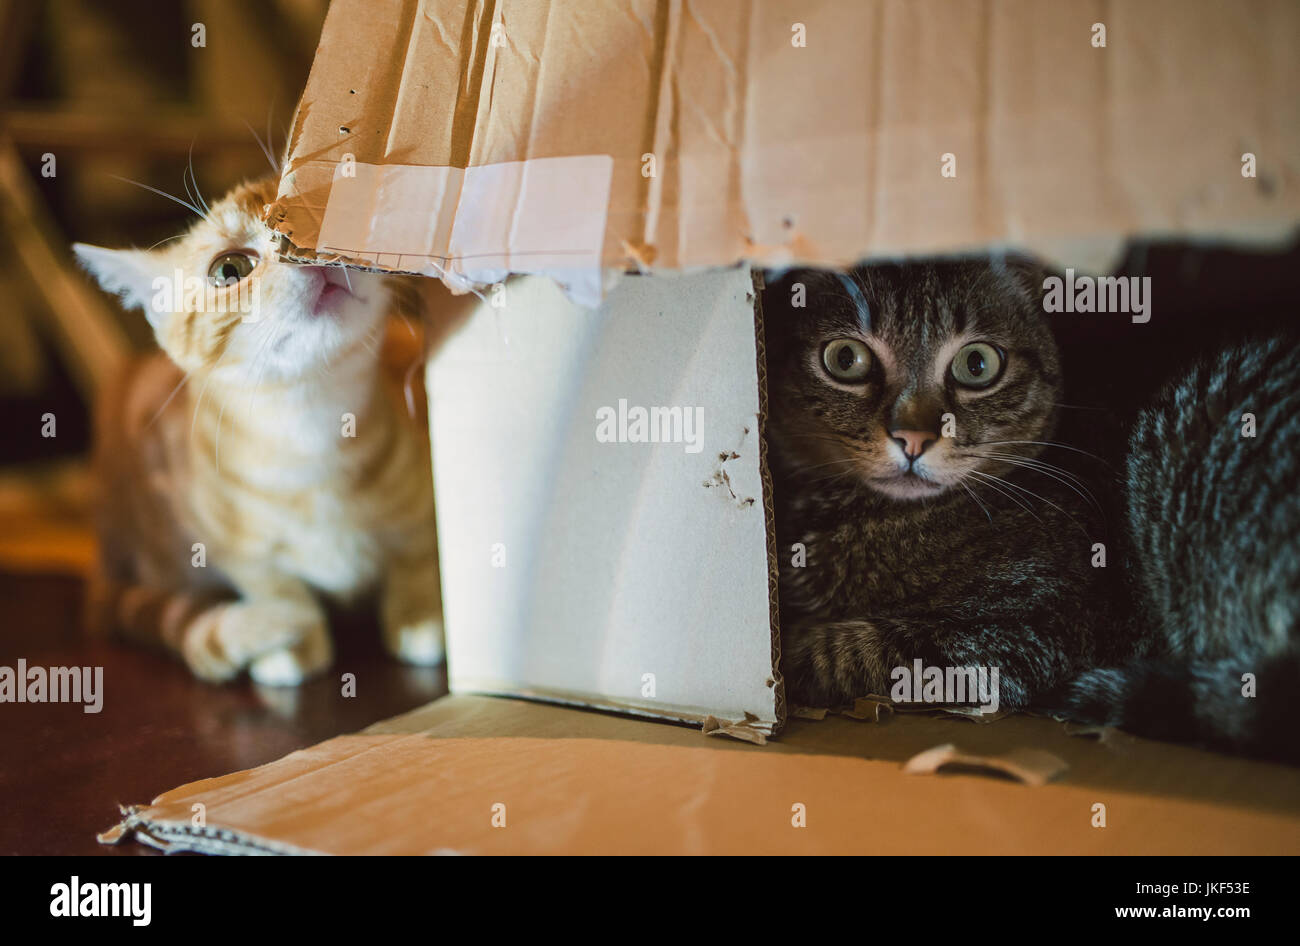 Two cats playing with cardboard box Stock Photo